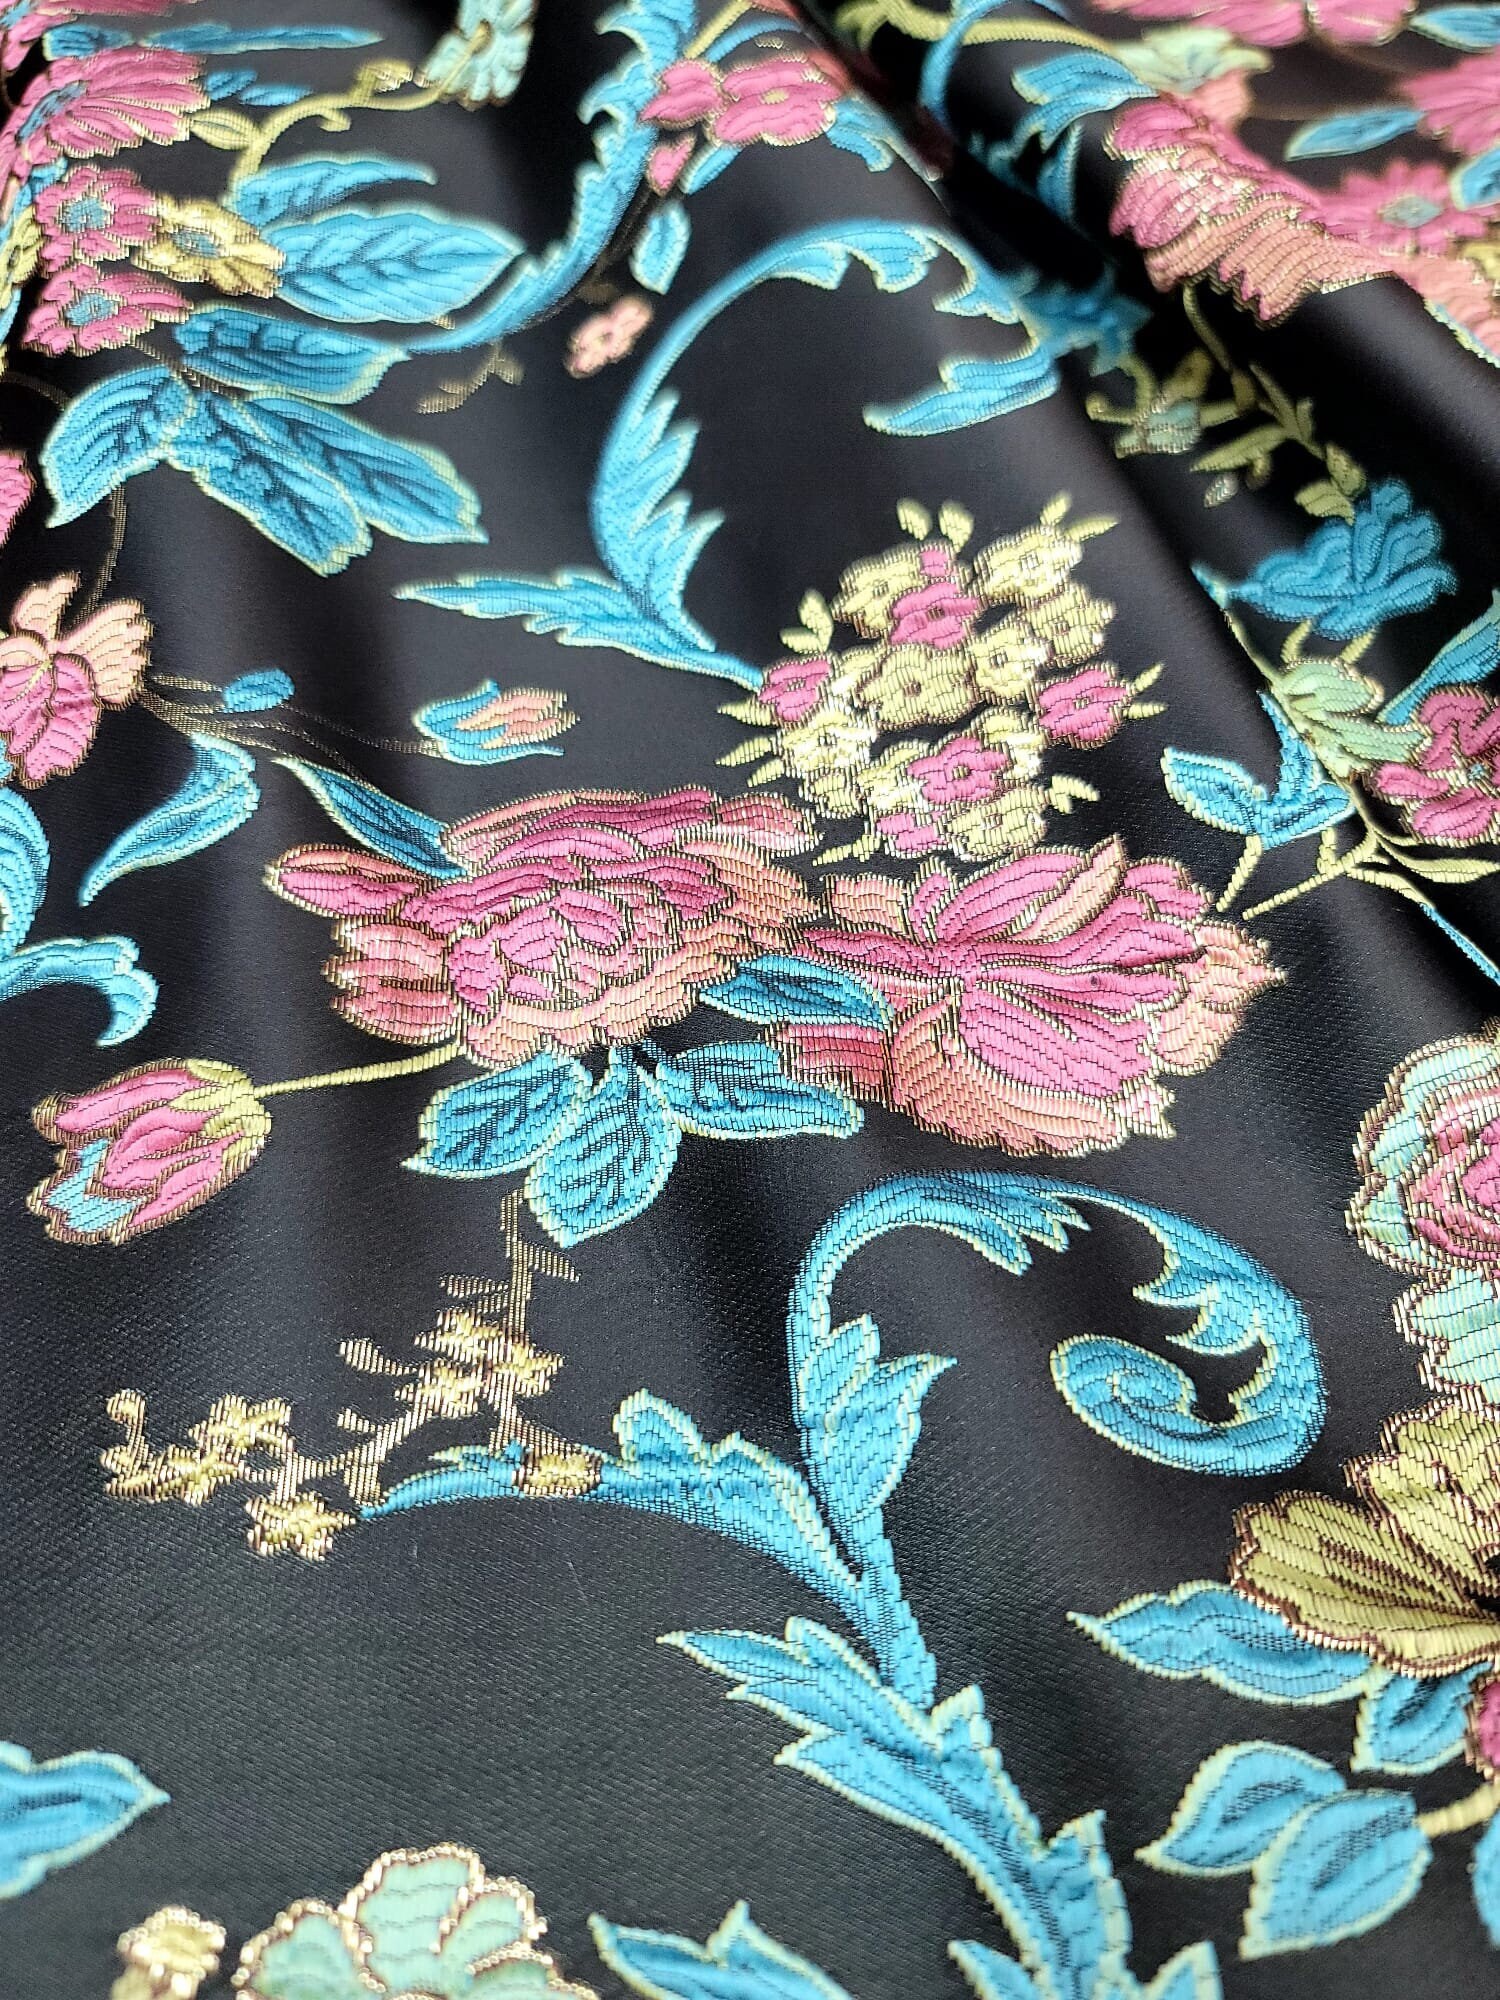 Brocade Multicolor Floral Fabric by the Yard Black Background